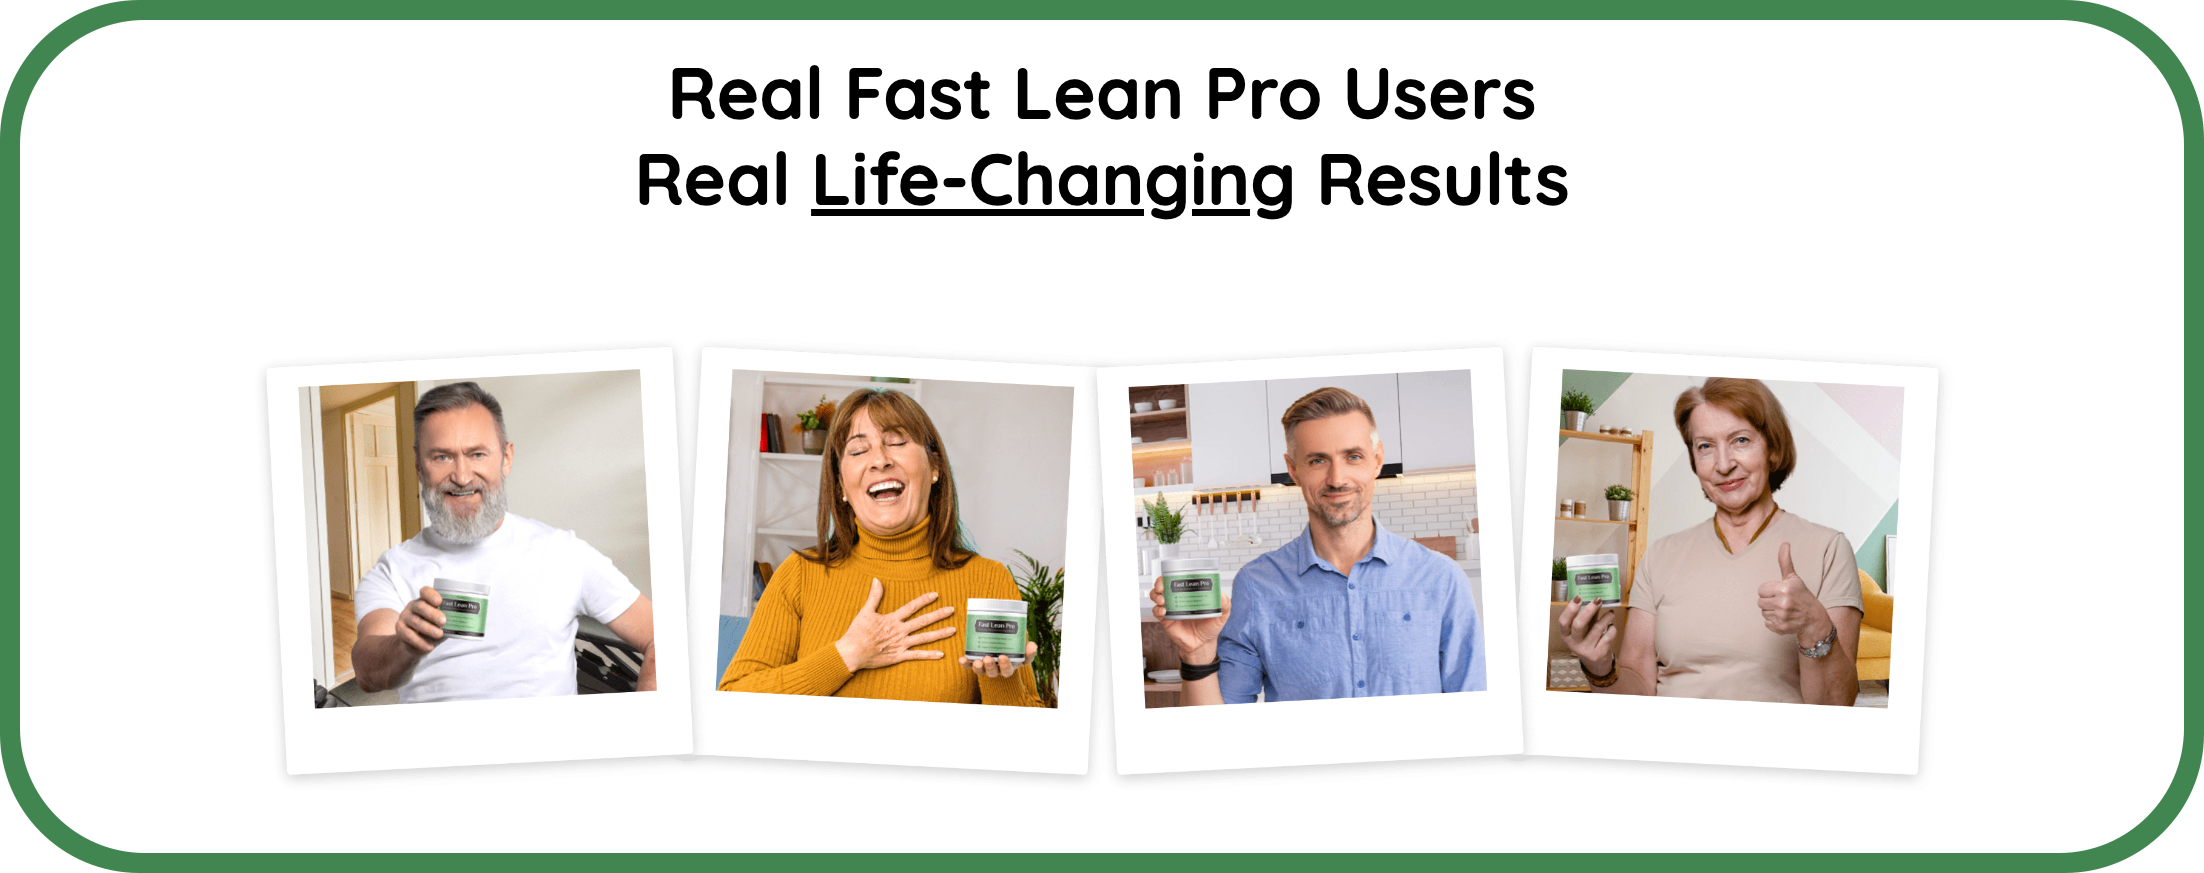 Real Fast Lean Pro Users Real Life-Changing Results